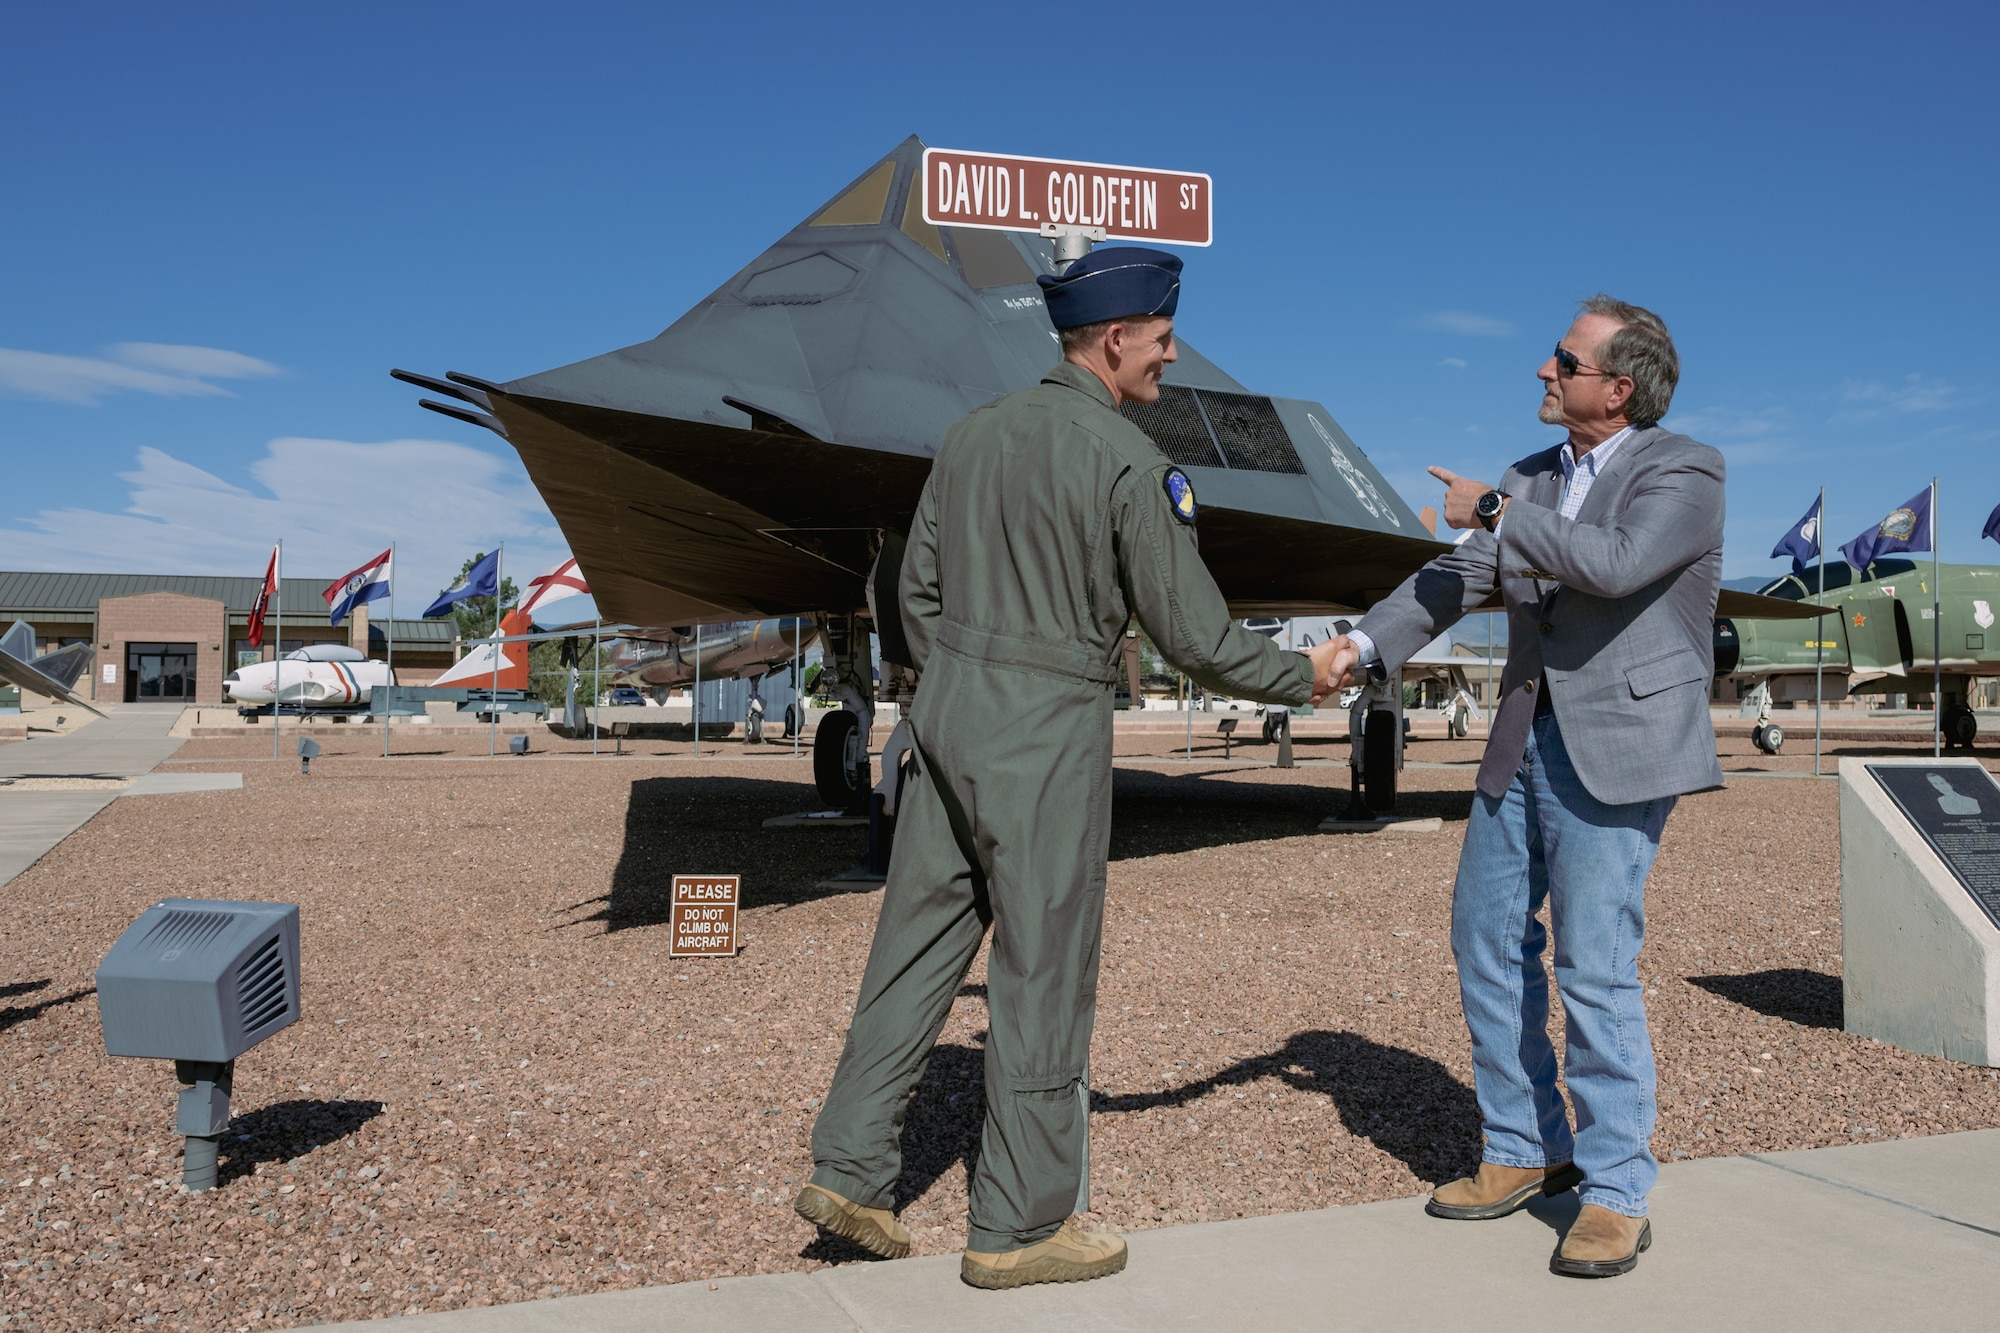 A street on Holloman Air Force Base is renamed to David L. Goldfein St at Holloman Air Force Base, New Mexico, Sept. 22, 2023. In June of 2006, Goldfein assumed command of the 49th Fighter Wing, which members of the current 49th Wing have decided to commemorate by naming a street in his honor. (U.S. Air Force photo by Senior Airman Antonio Salfran)